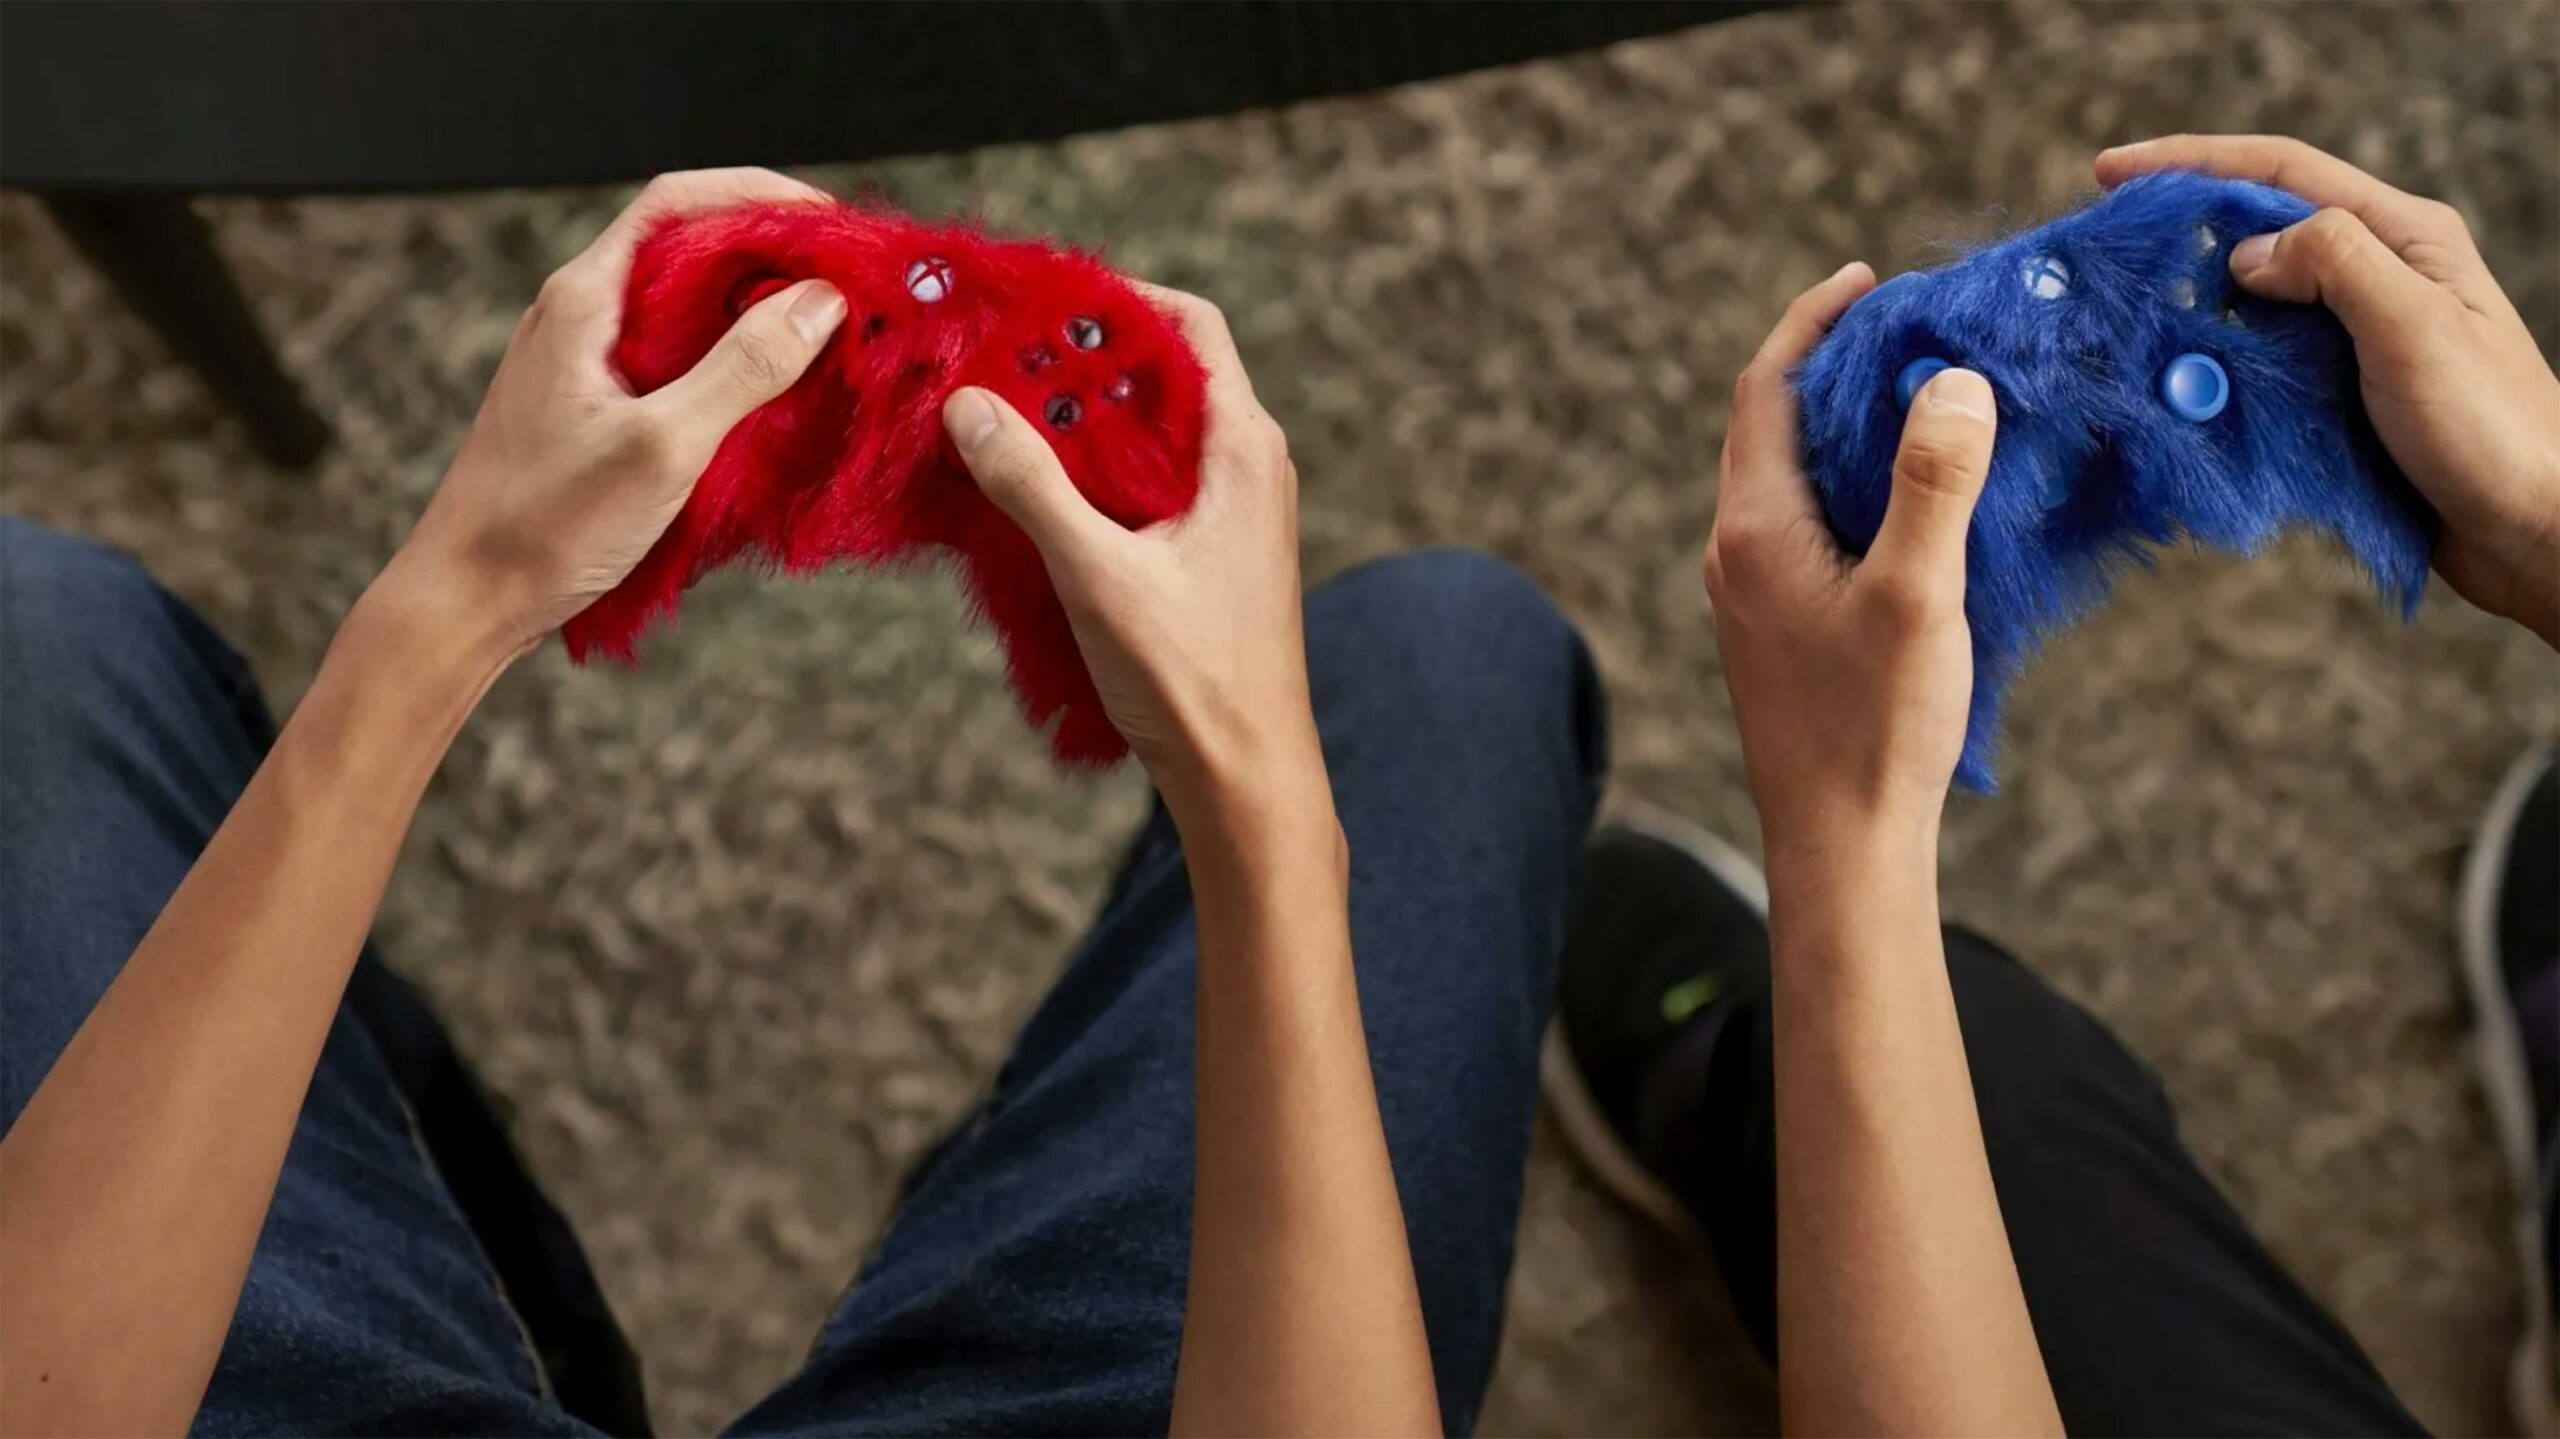 Sonic Xbox controllers